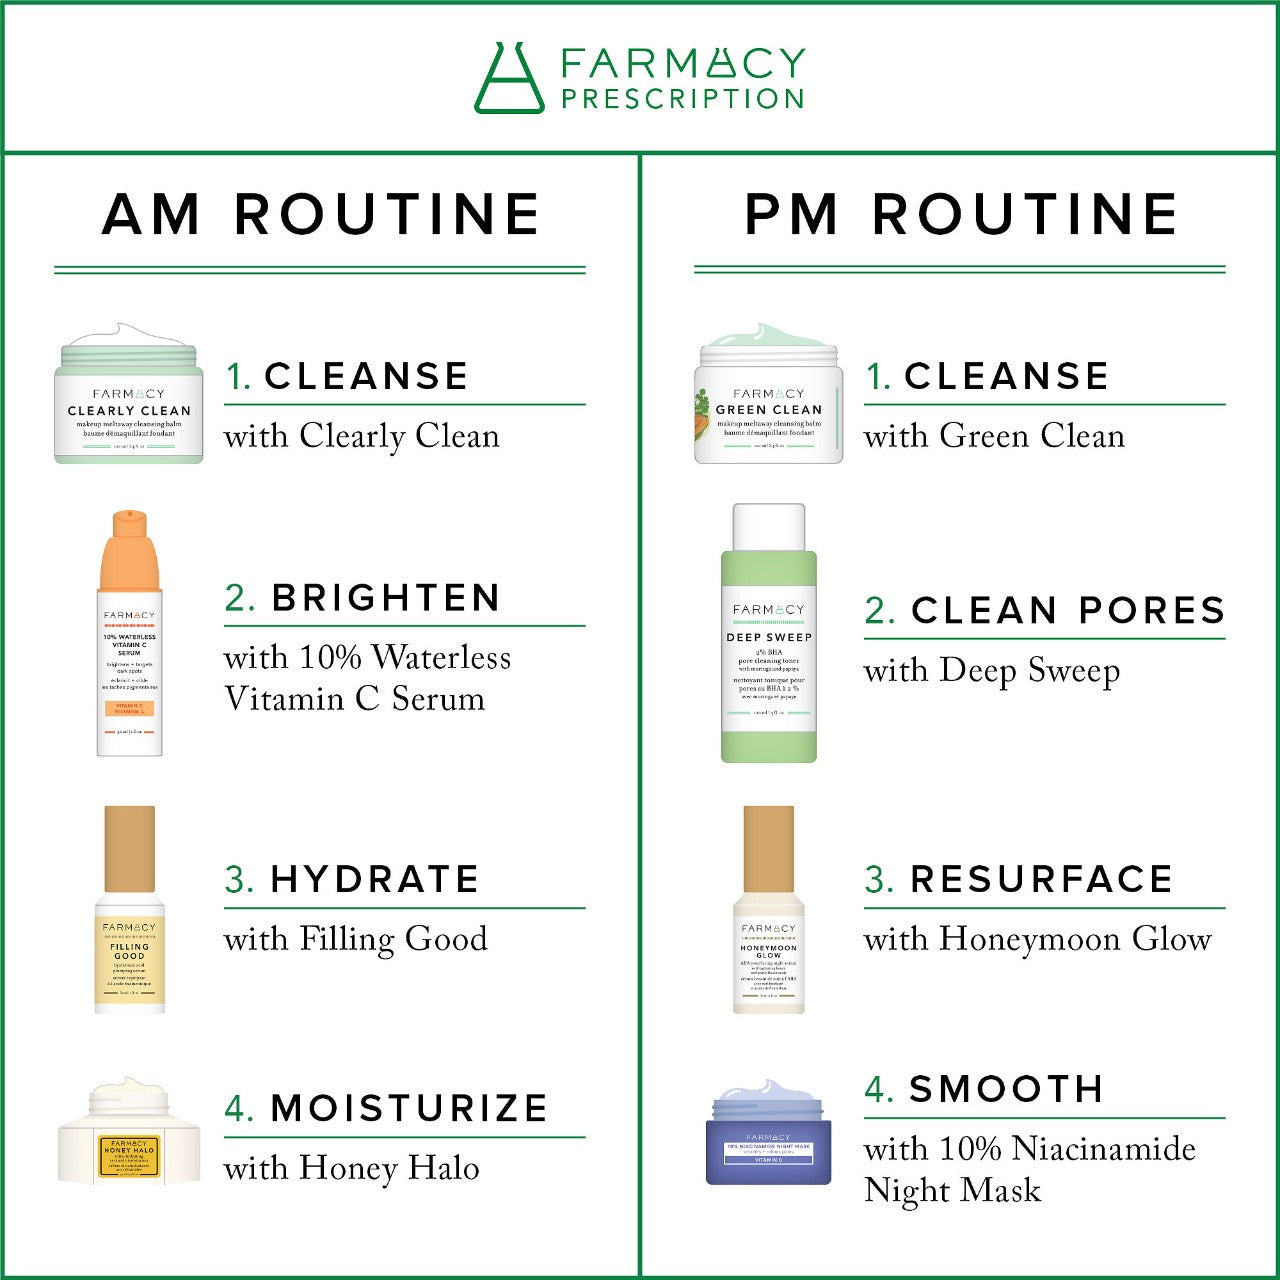 Farmacy The Farmacy Vault Set- Day-to-Night Bestsellers